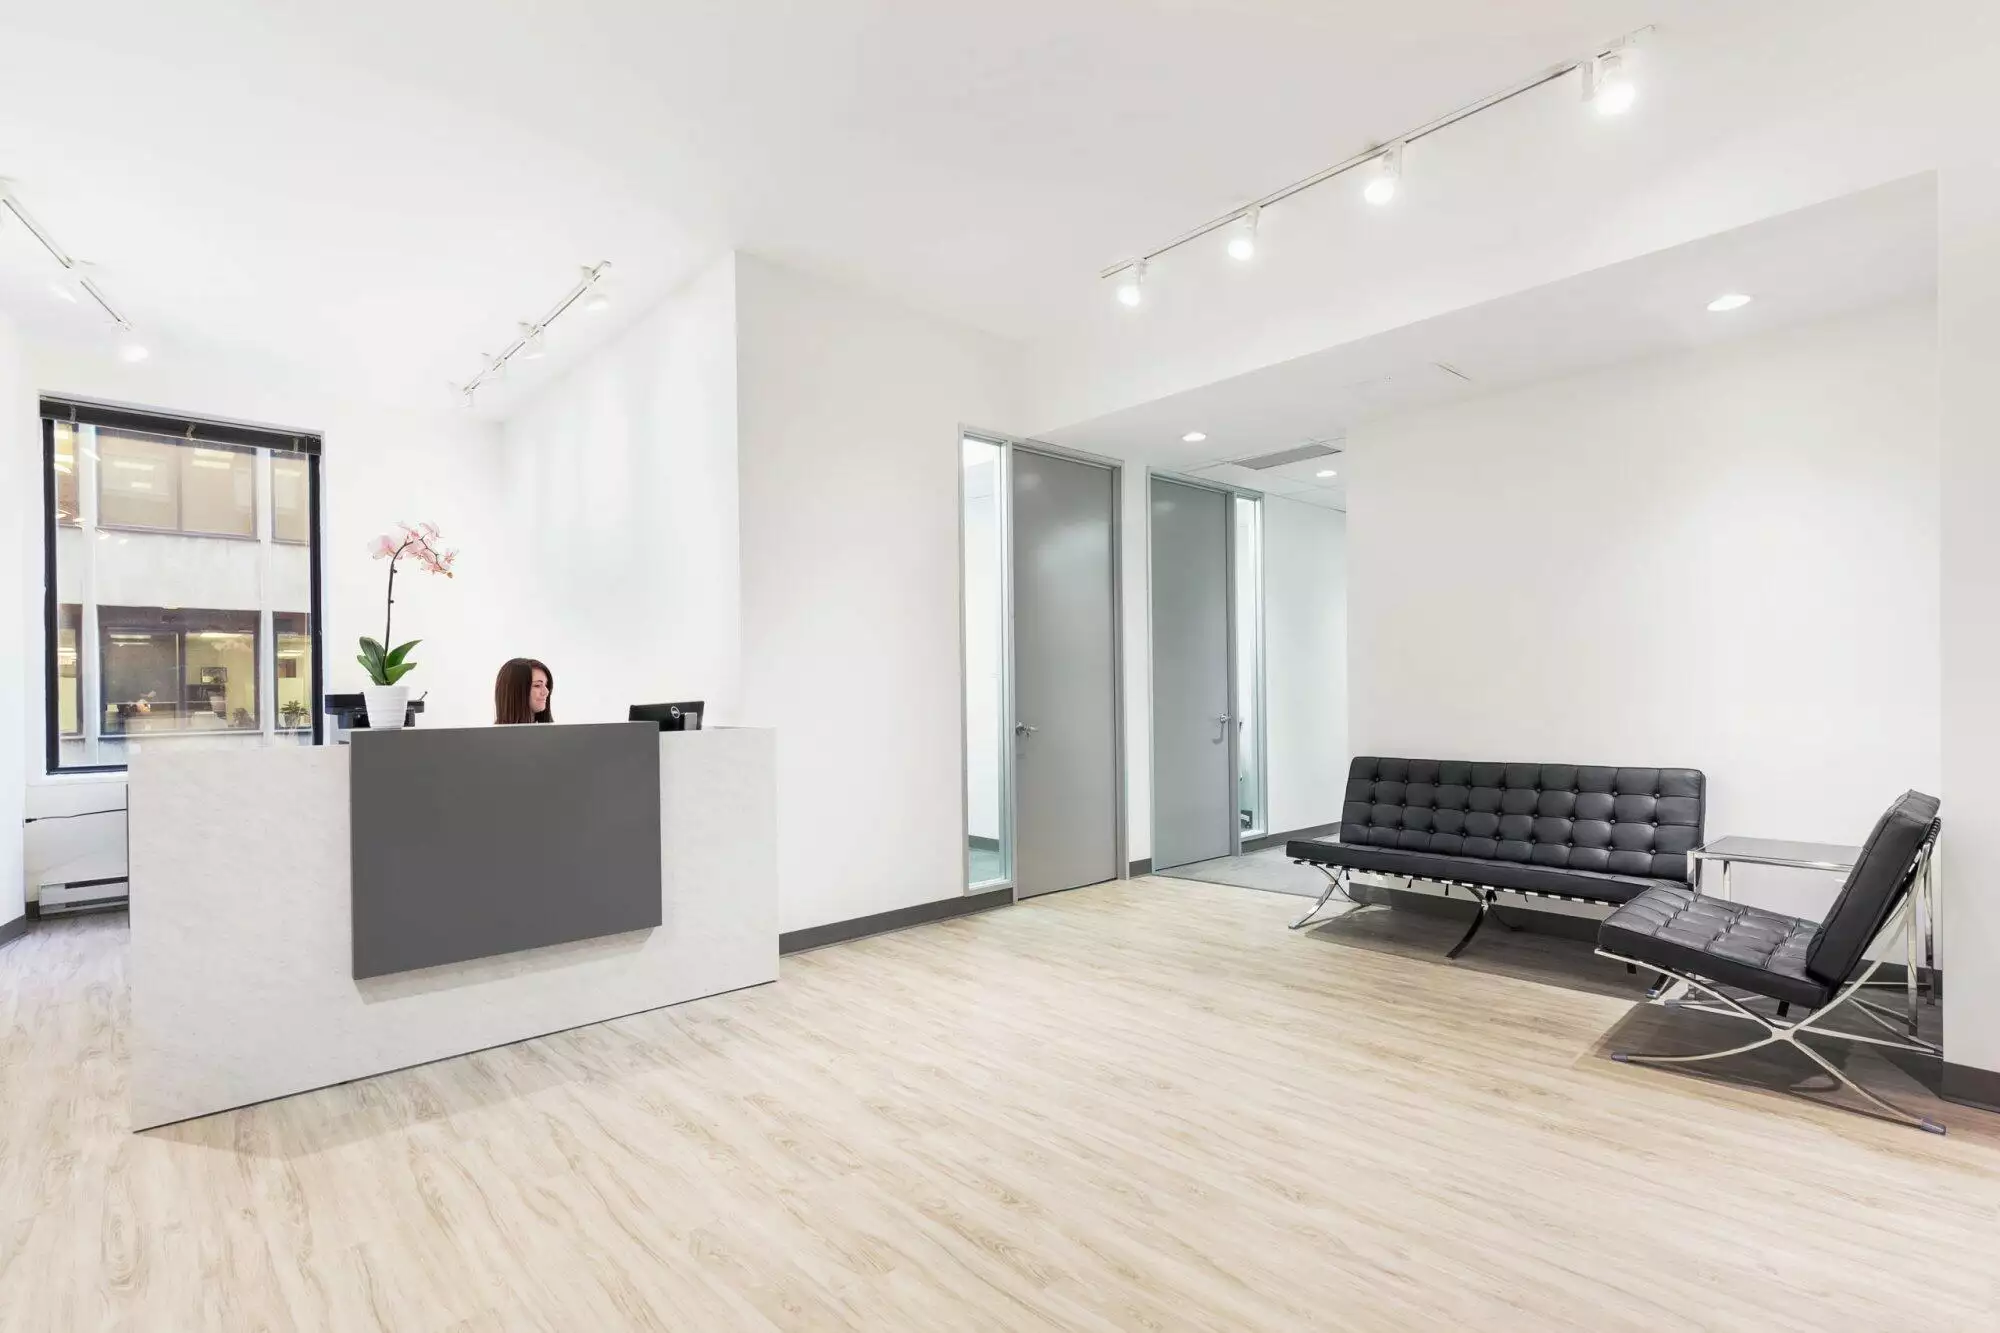 Modern office reception area with a black couch, white reception desk, wood flooring, and a flower on the desk.